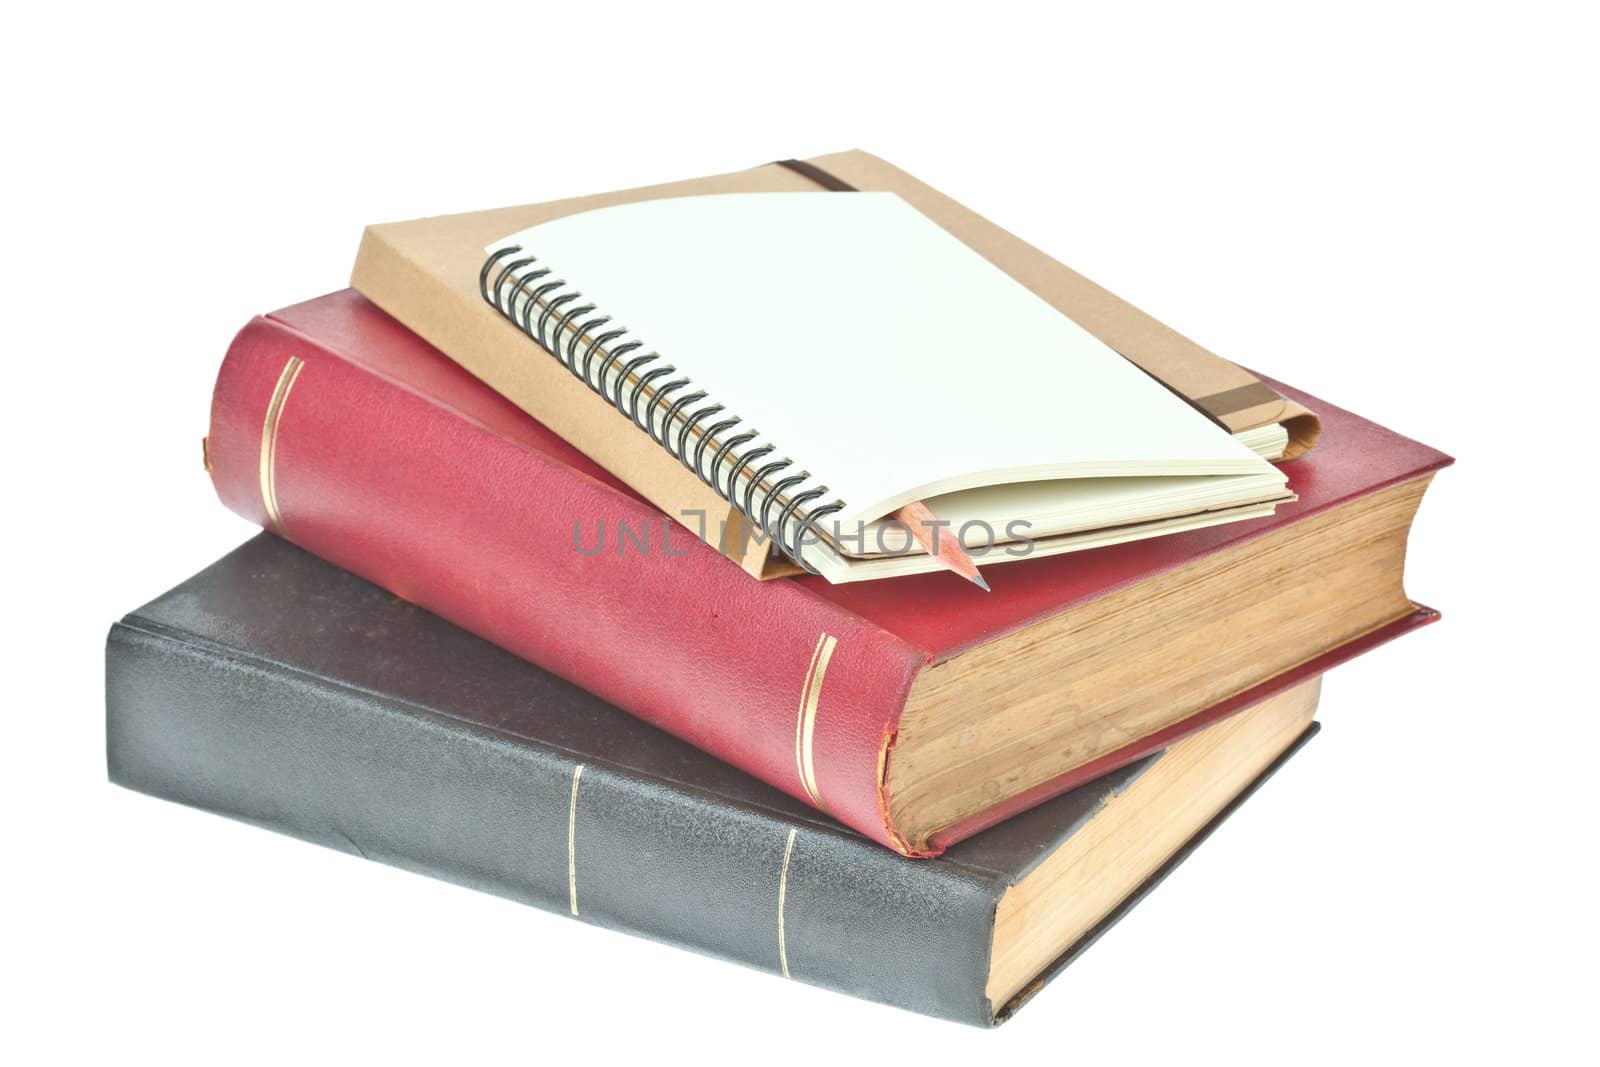 Pencil in, cream colored paper notebook and book as background